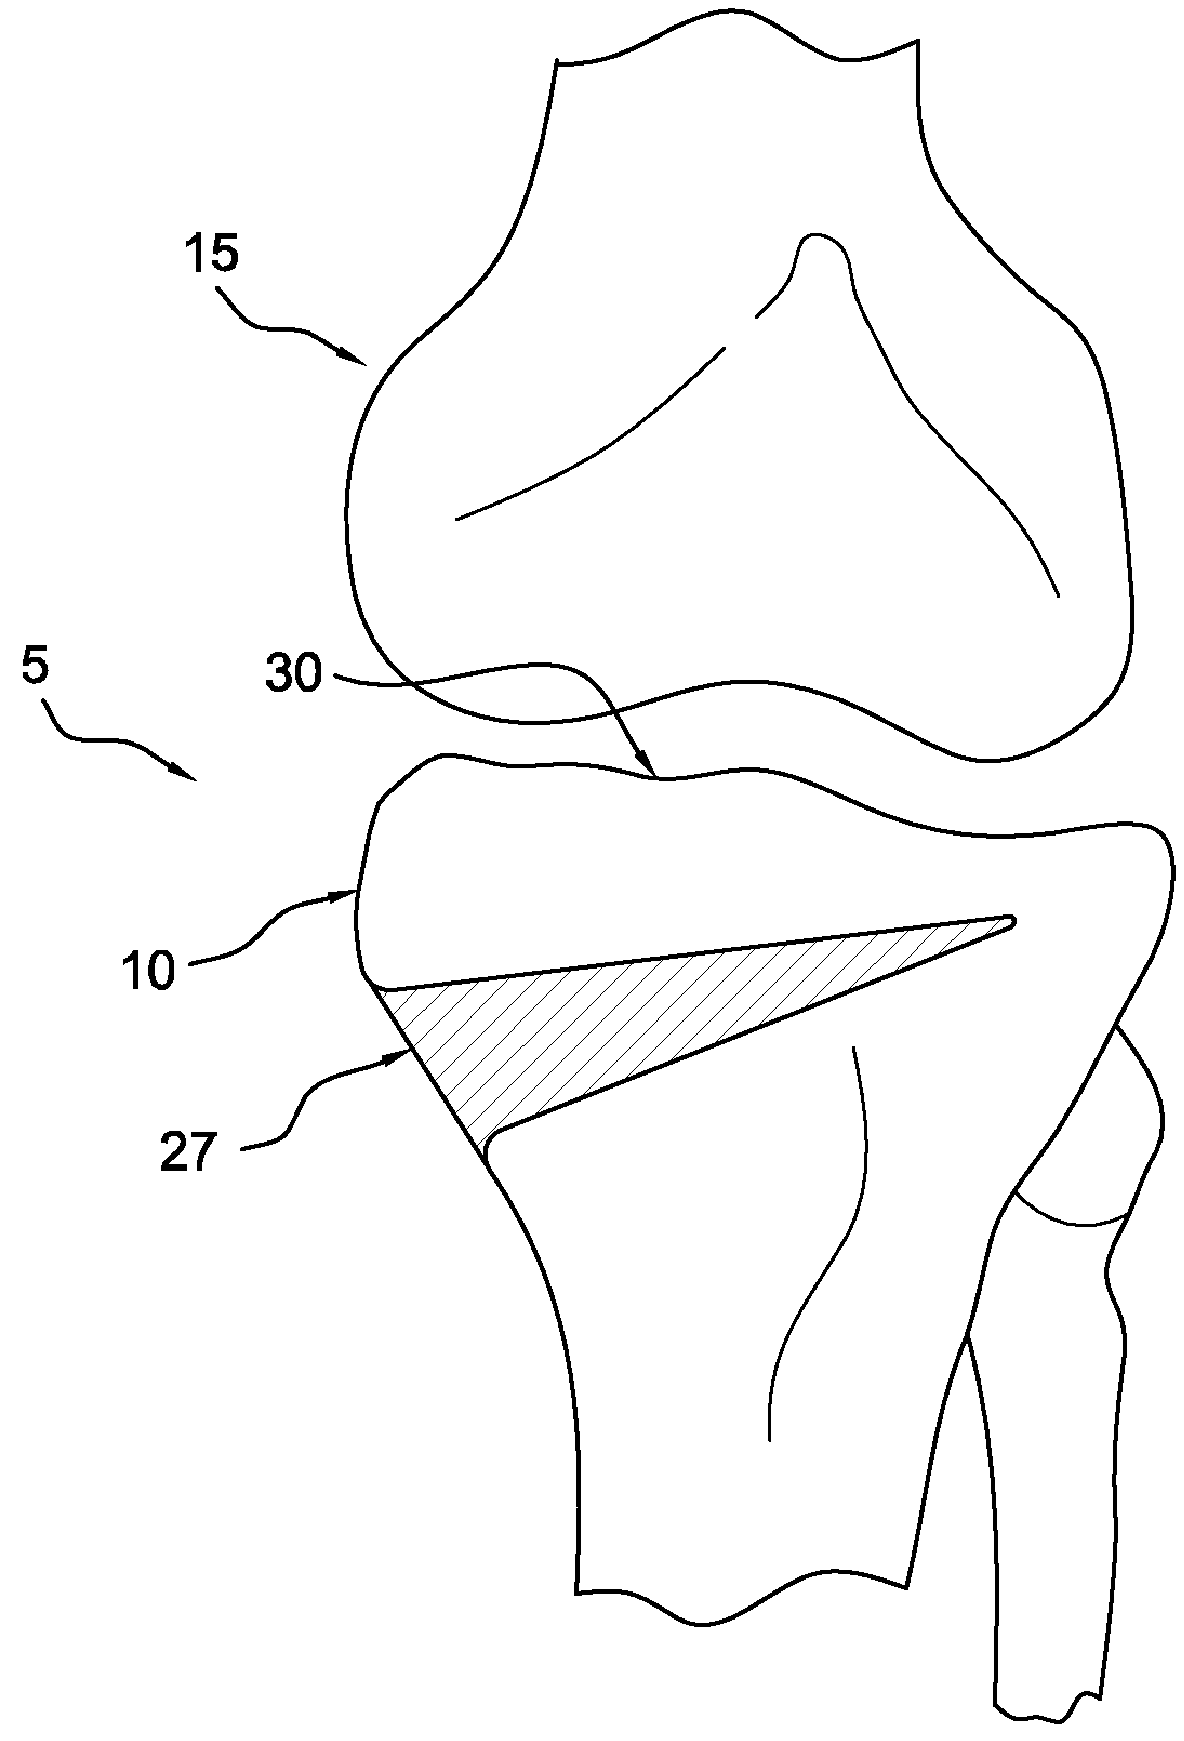 Method and apparatus for reconstructing a ligament and/or repairing cartilage, and for performing an open wedge, high tibial osteotomy